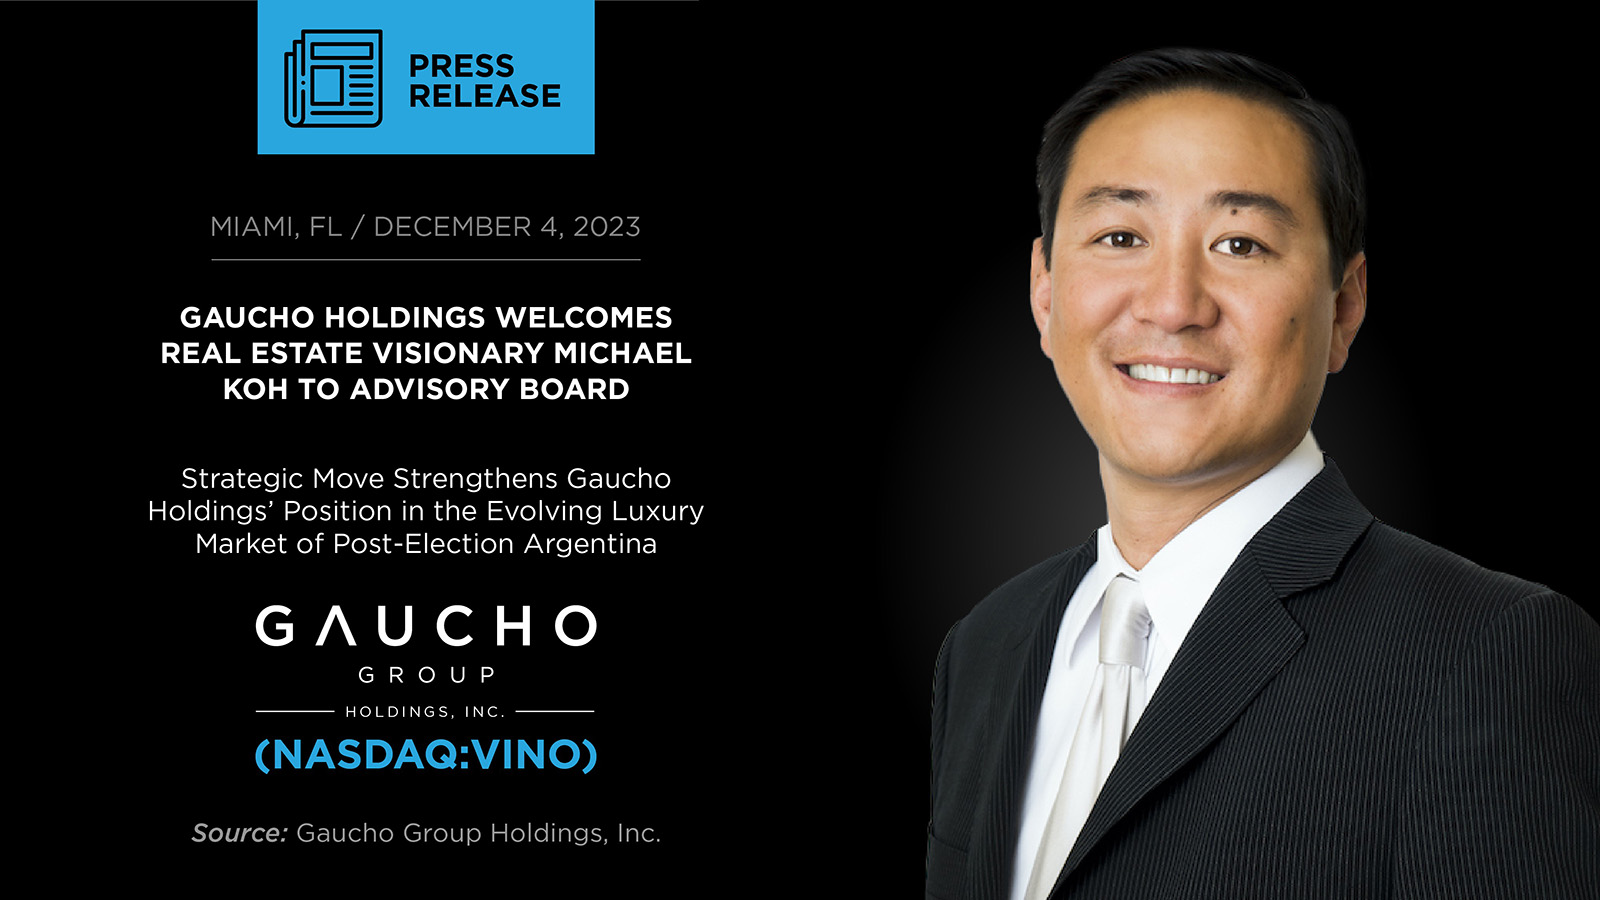 GAUCHO HOLDINGS WELCOMES REAL ESTATE VISIONARY MICHAEL KOH TO ADVISORY BOARD  Strategic Move Strengthens Gaucho Holdings’ Position in the Evolving Luxury Market of Post-Election Argentina  MIAMI, FL / DECEMBER 1, 2022 